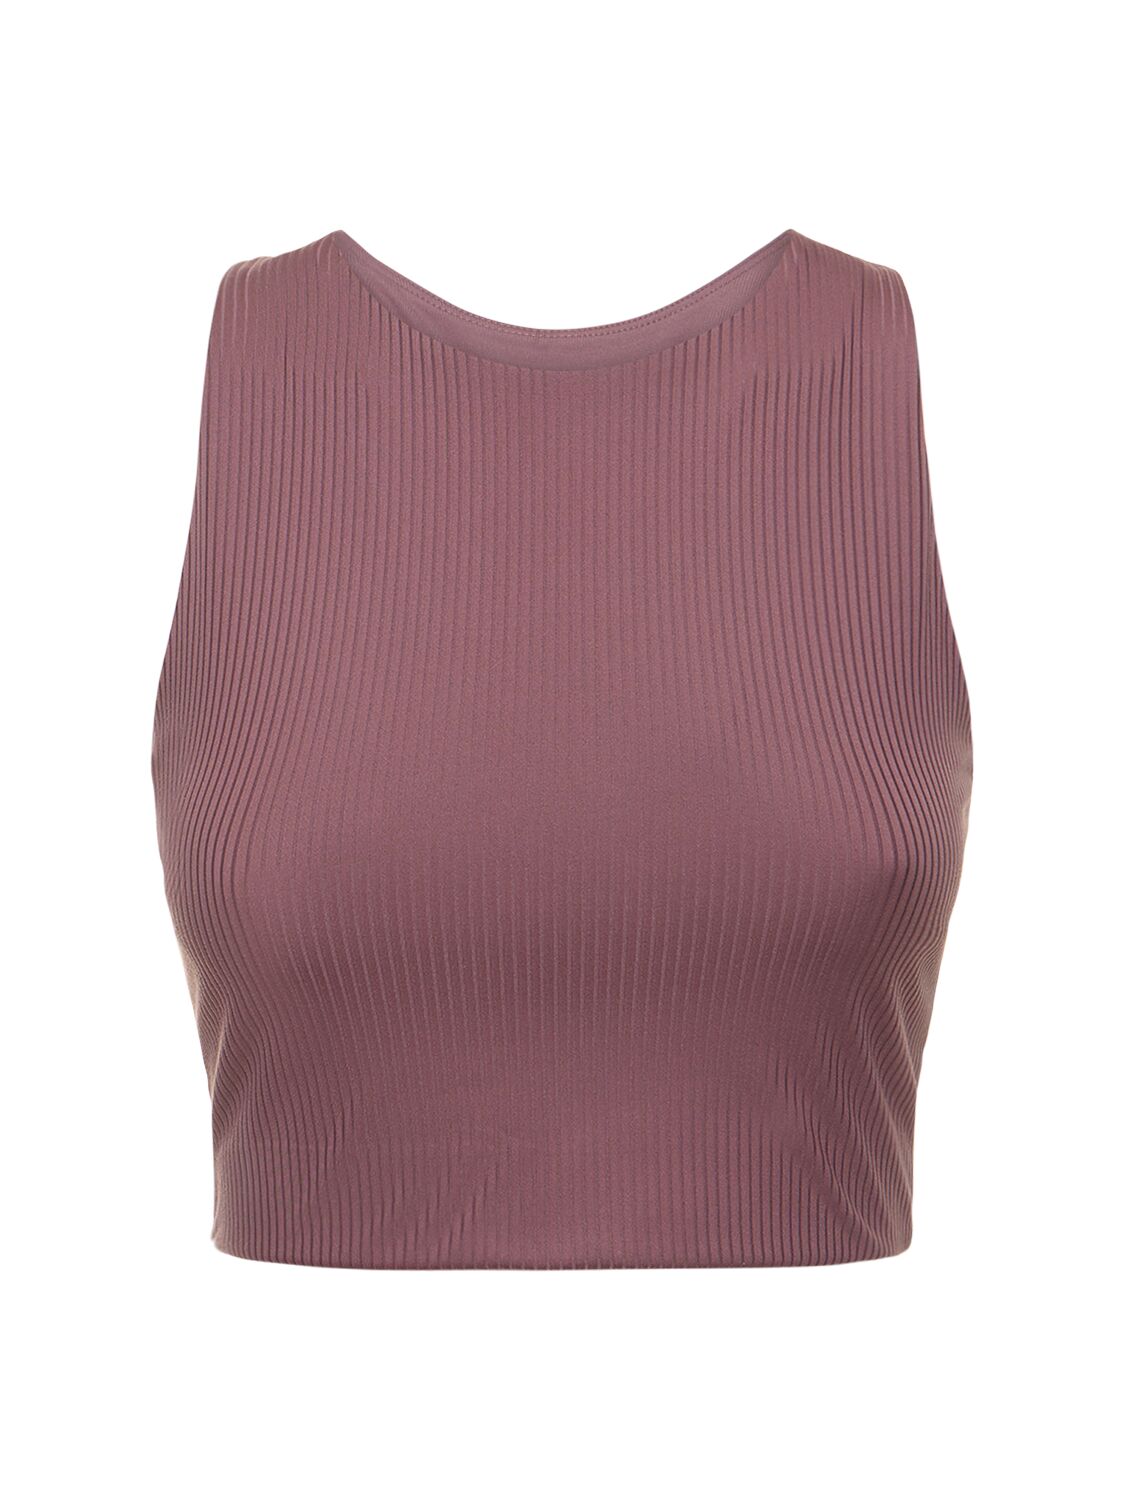 Image of Dylan Ribbed Stretch Tech Bra Top